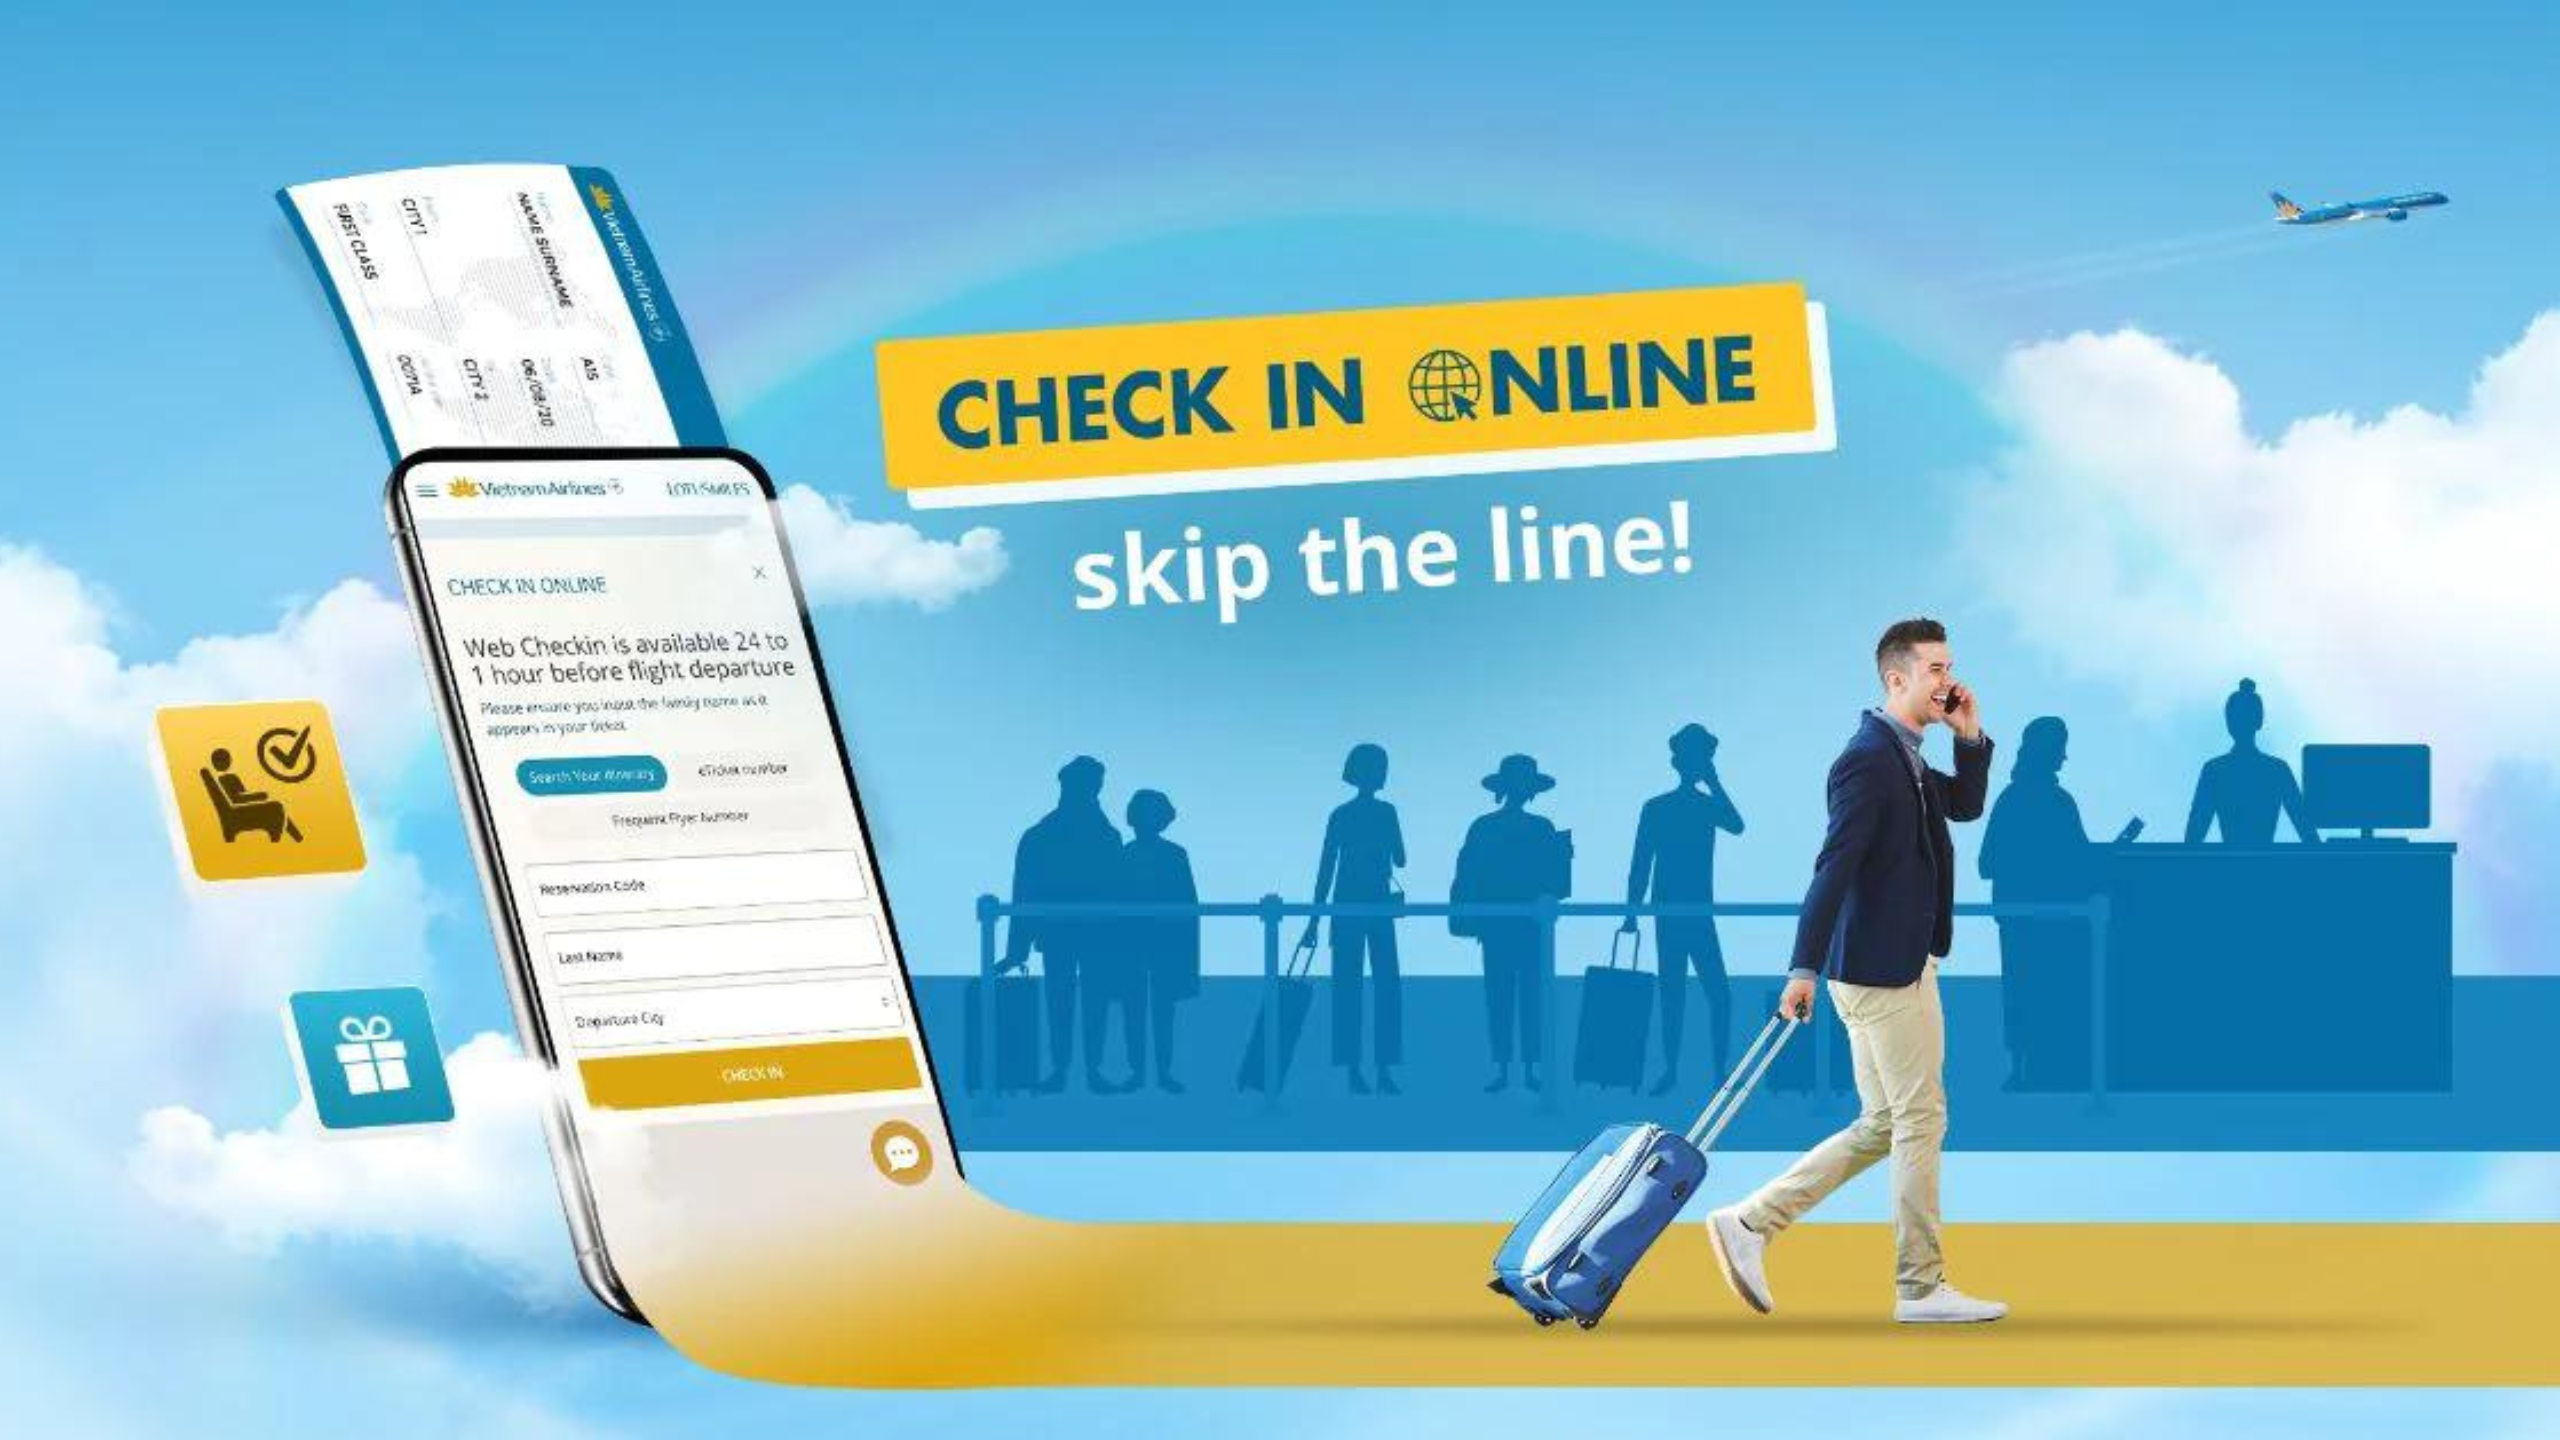 Air France Online Check-in